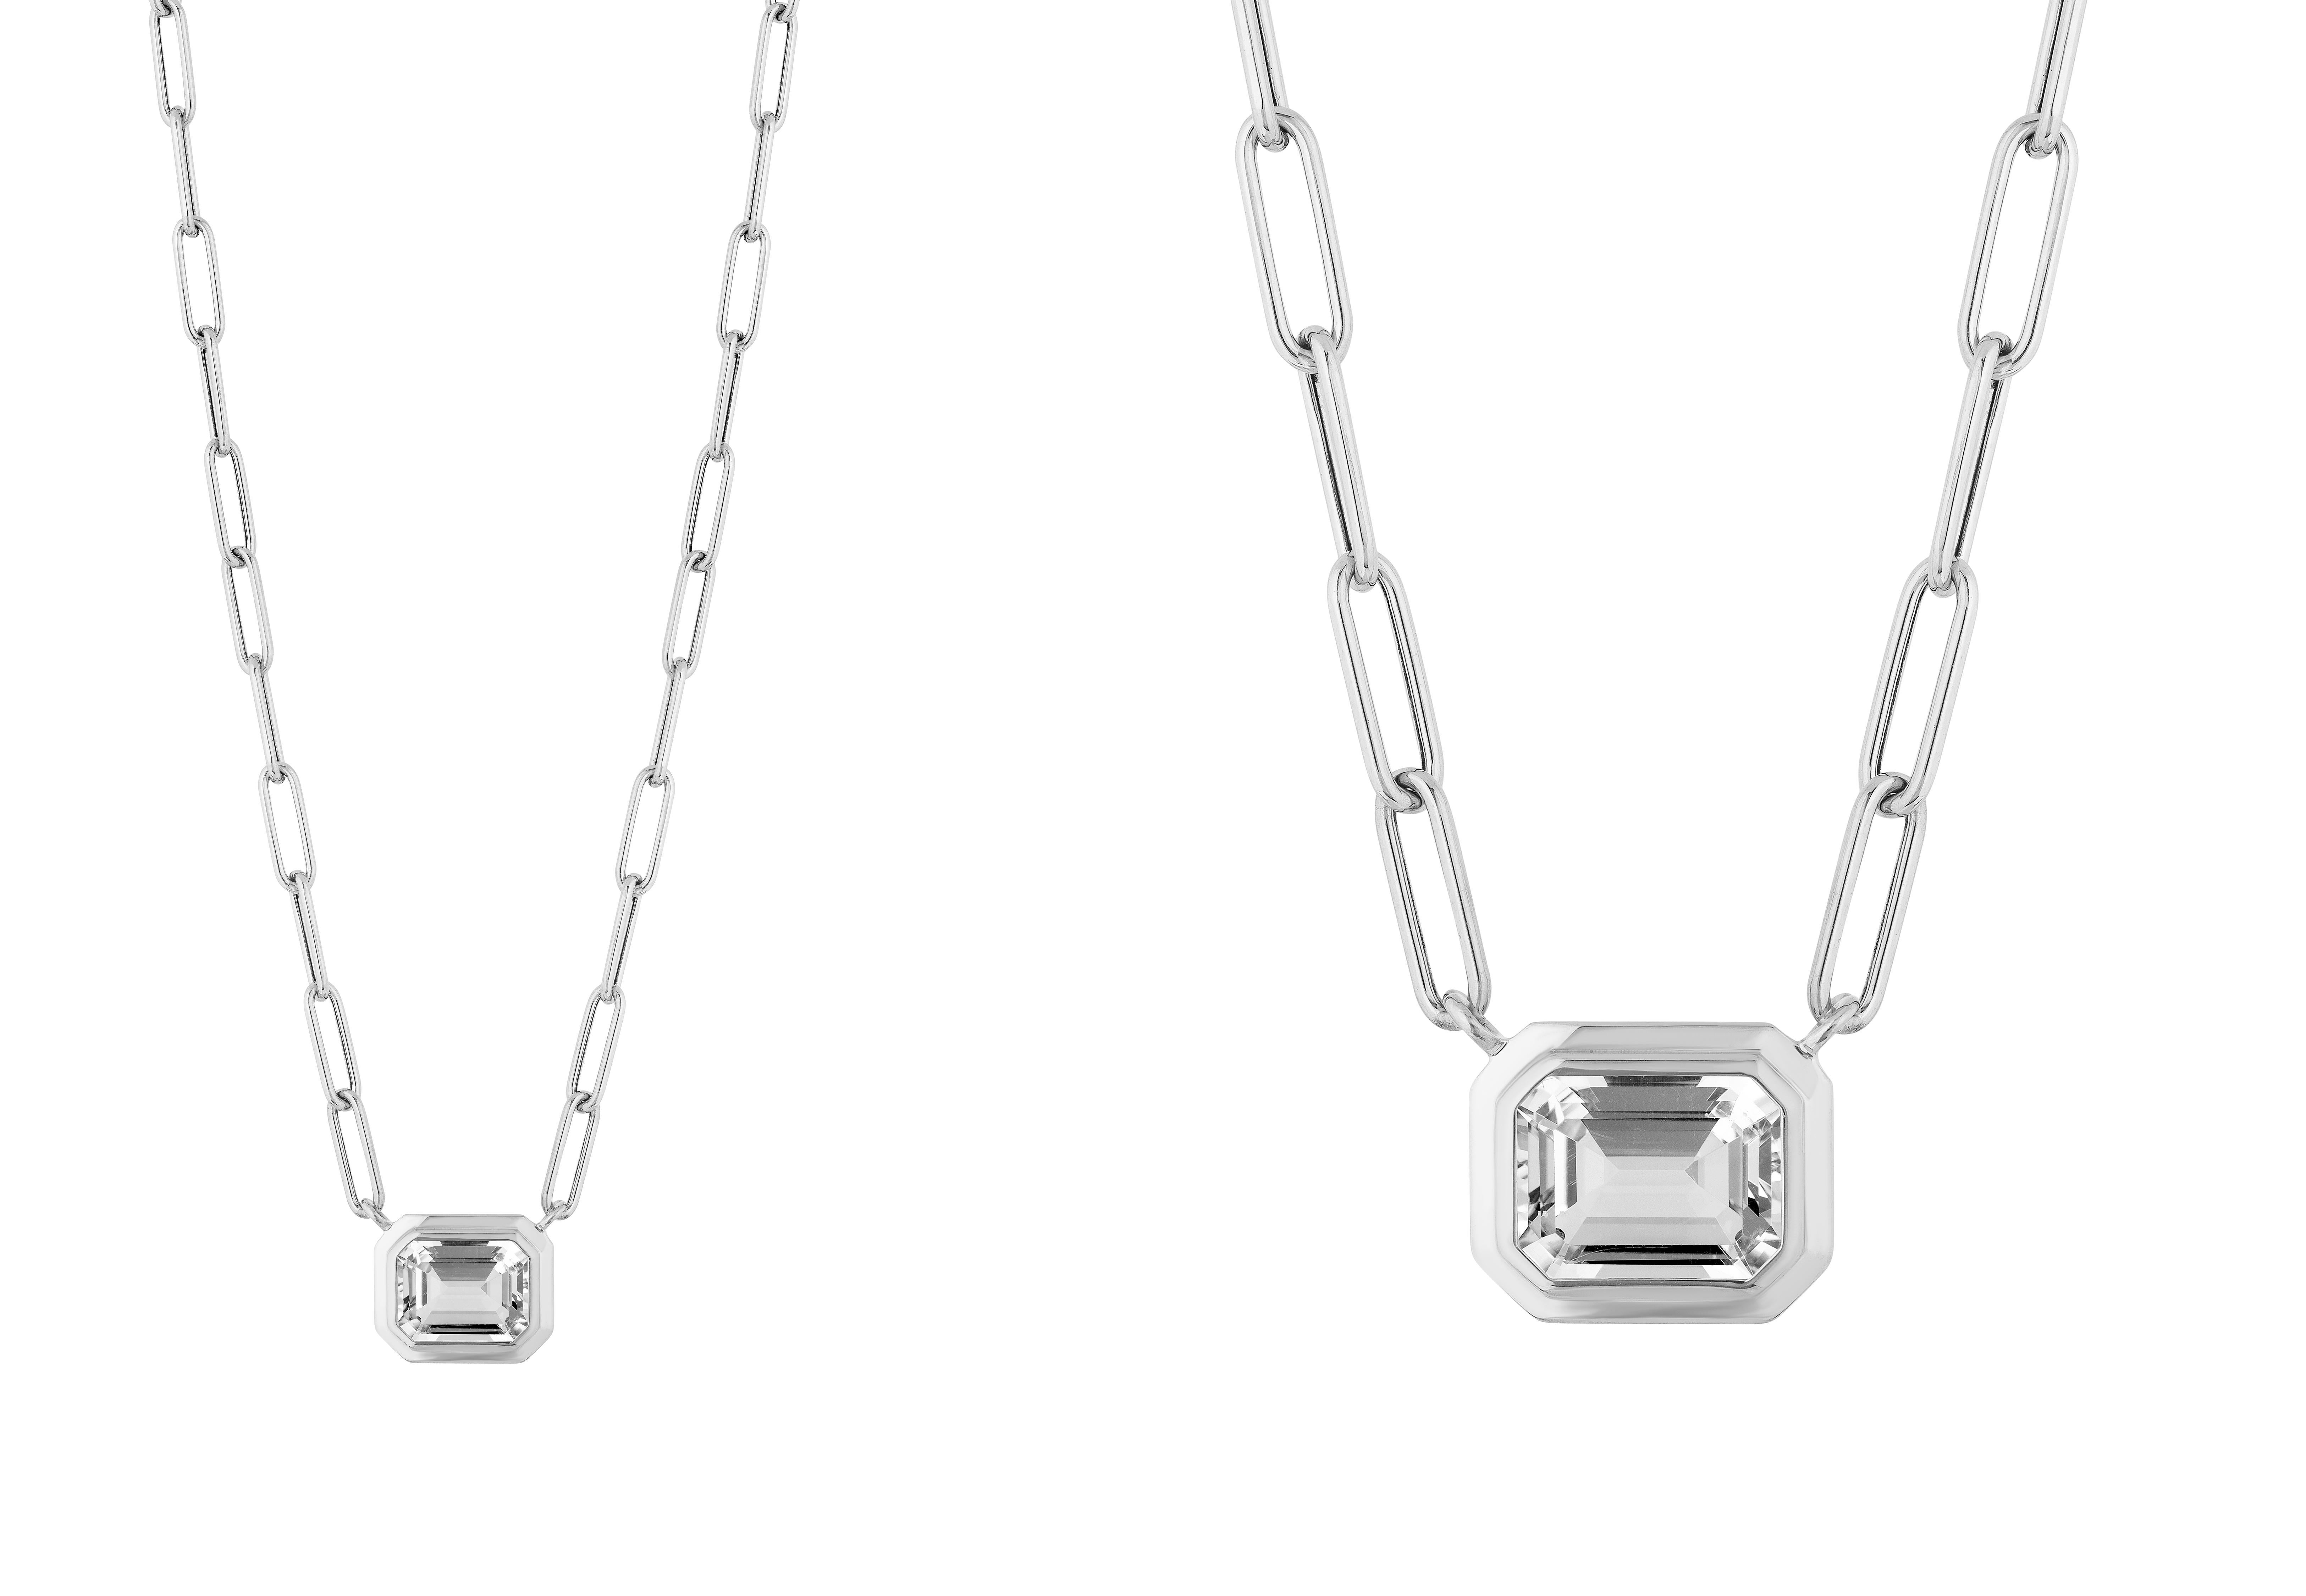 This beautiful East-West Rock Crystal Emerald Cut Bezel Set Pendant in 18K White Gold is from our ‘Manhattan’ Collection. Minimalist lines yet bold structures are what our Manhattan Collection is all about. Our pieces represent the famous skyline